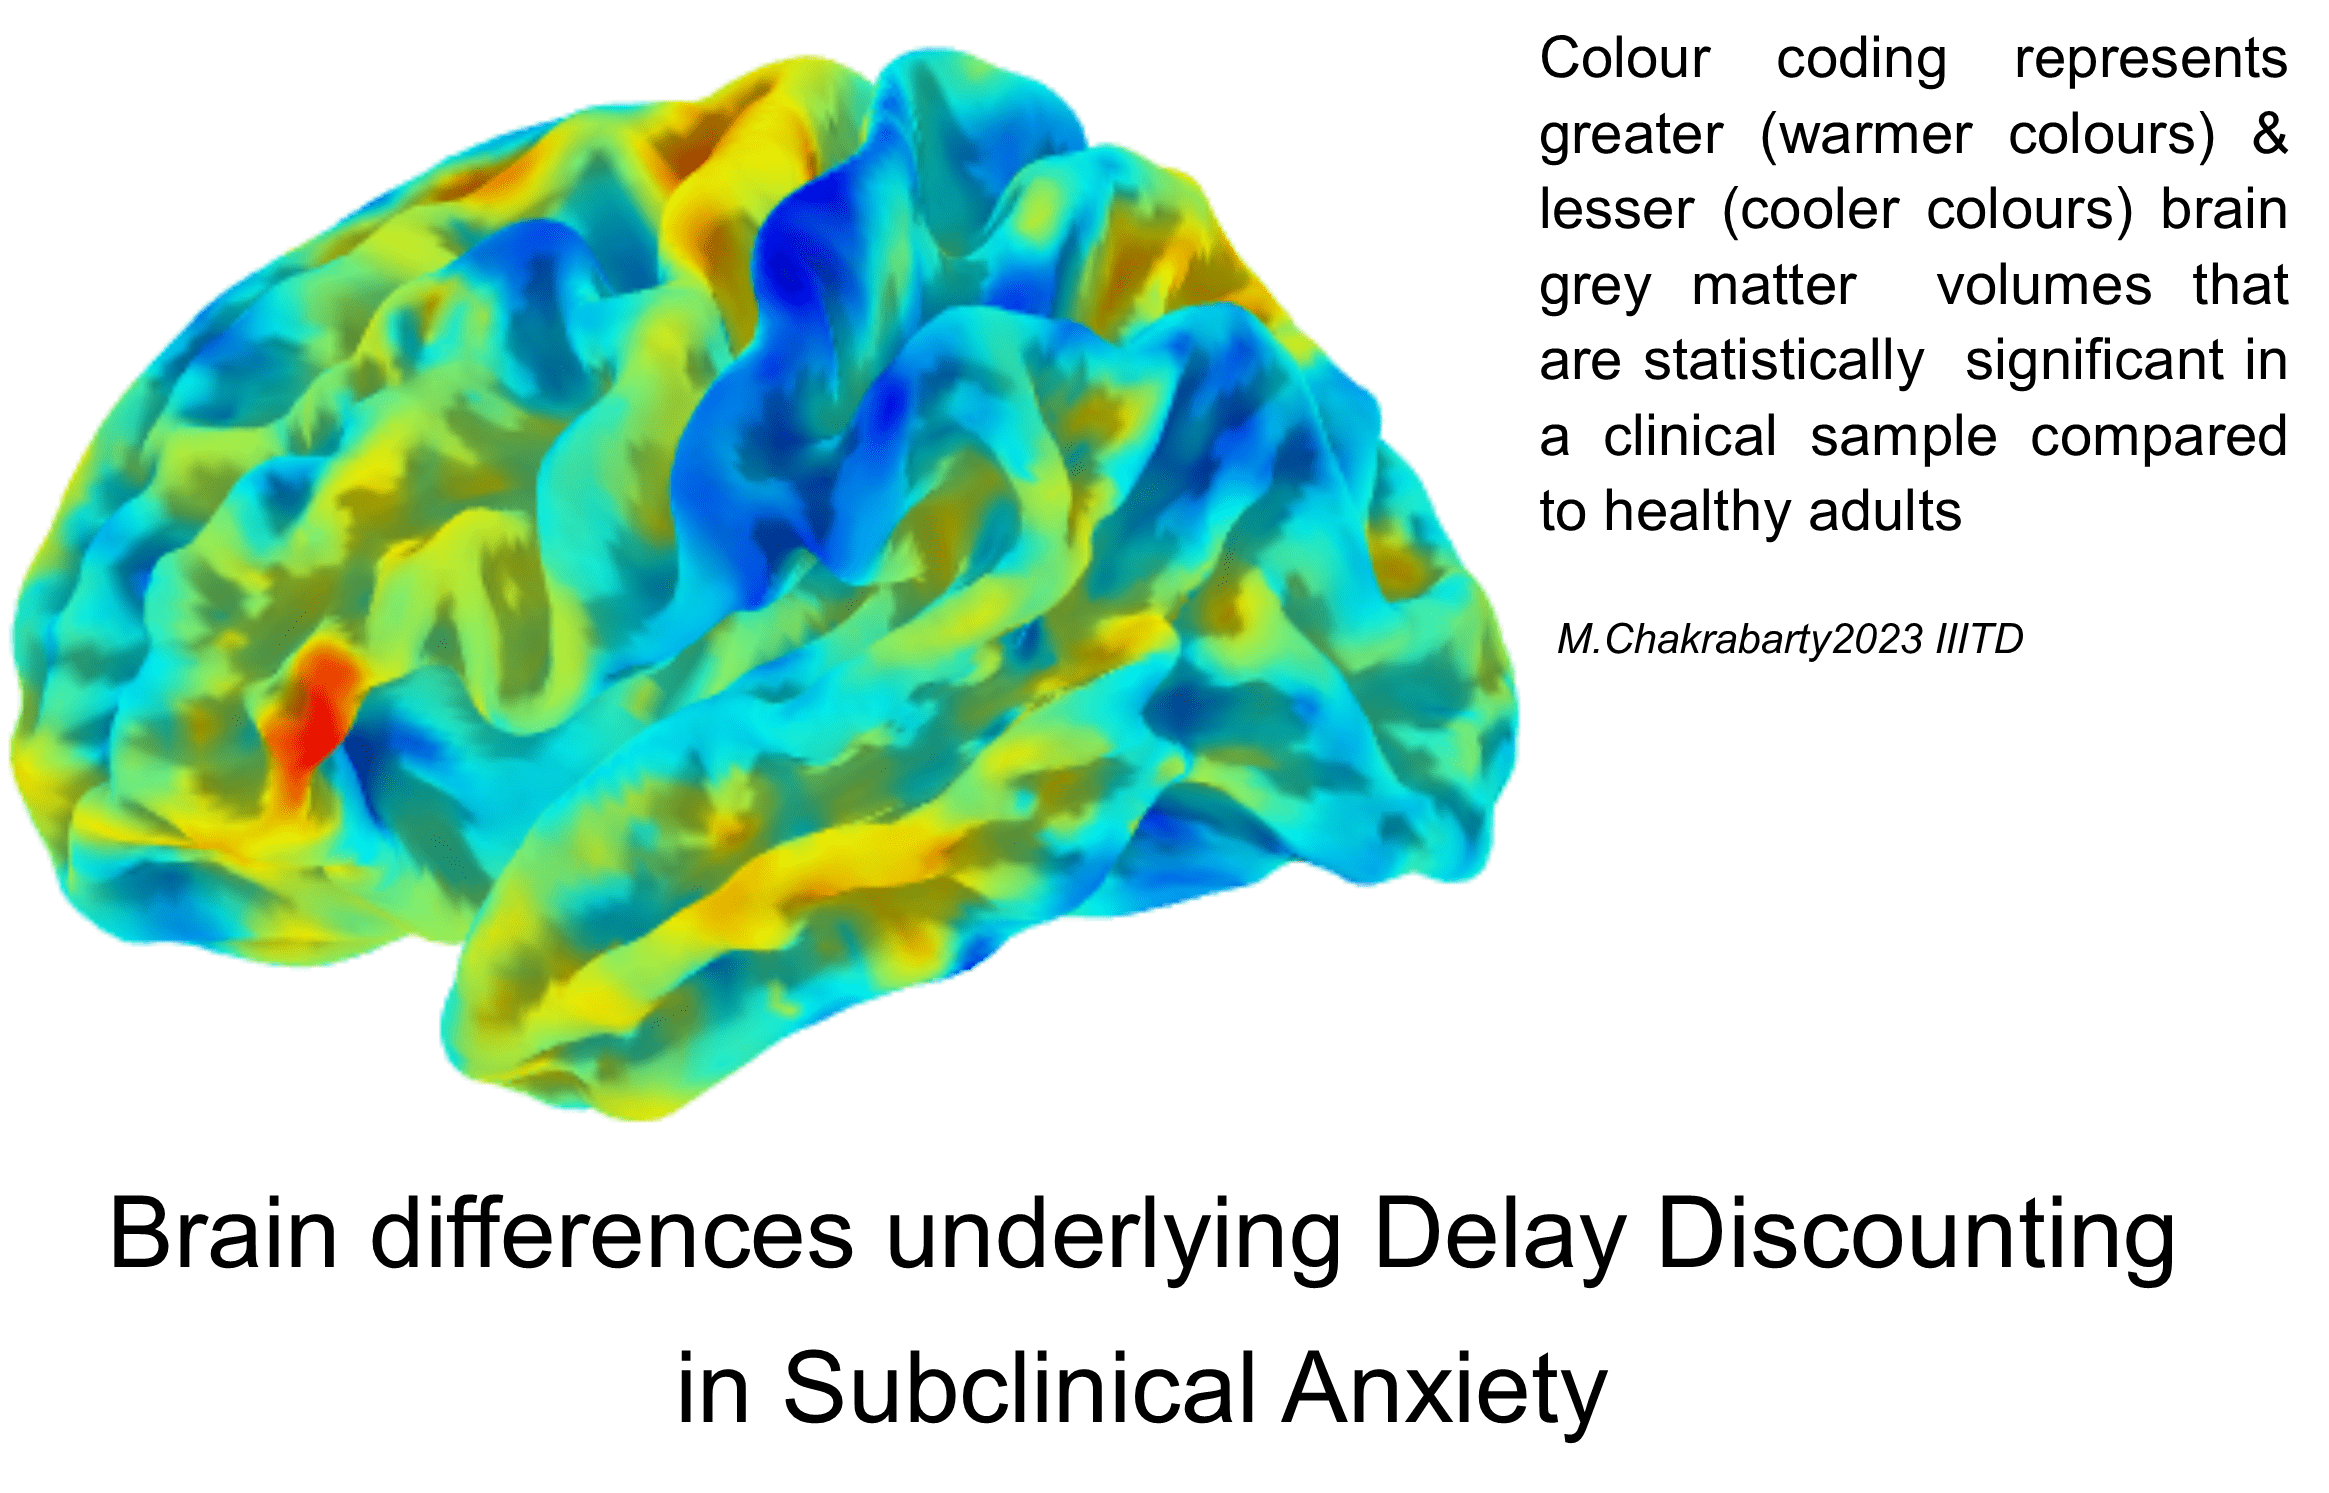 Brain Differences Underlying Delay Discounting in Subclinical Anxiety